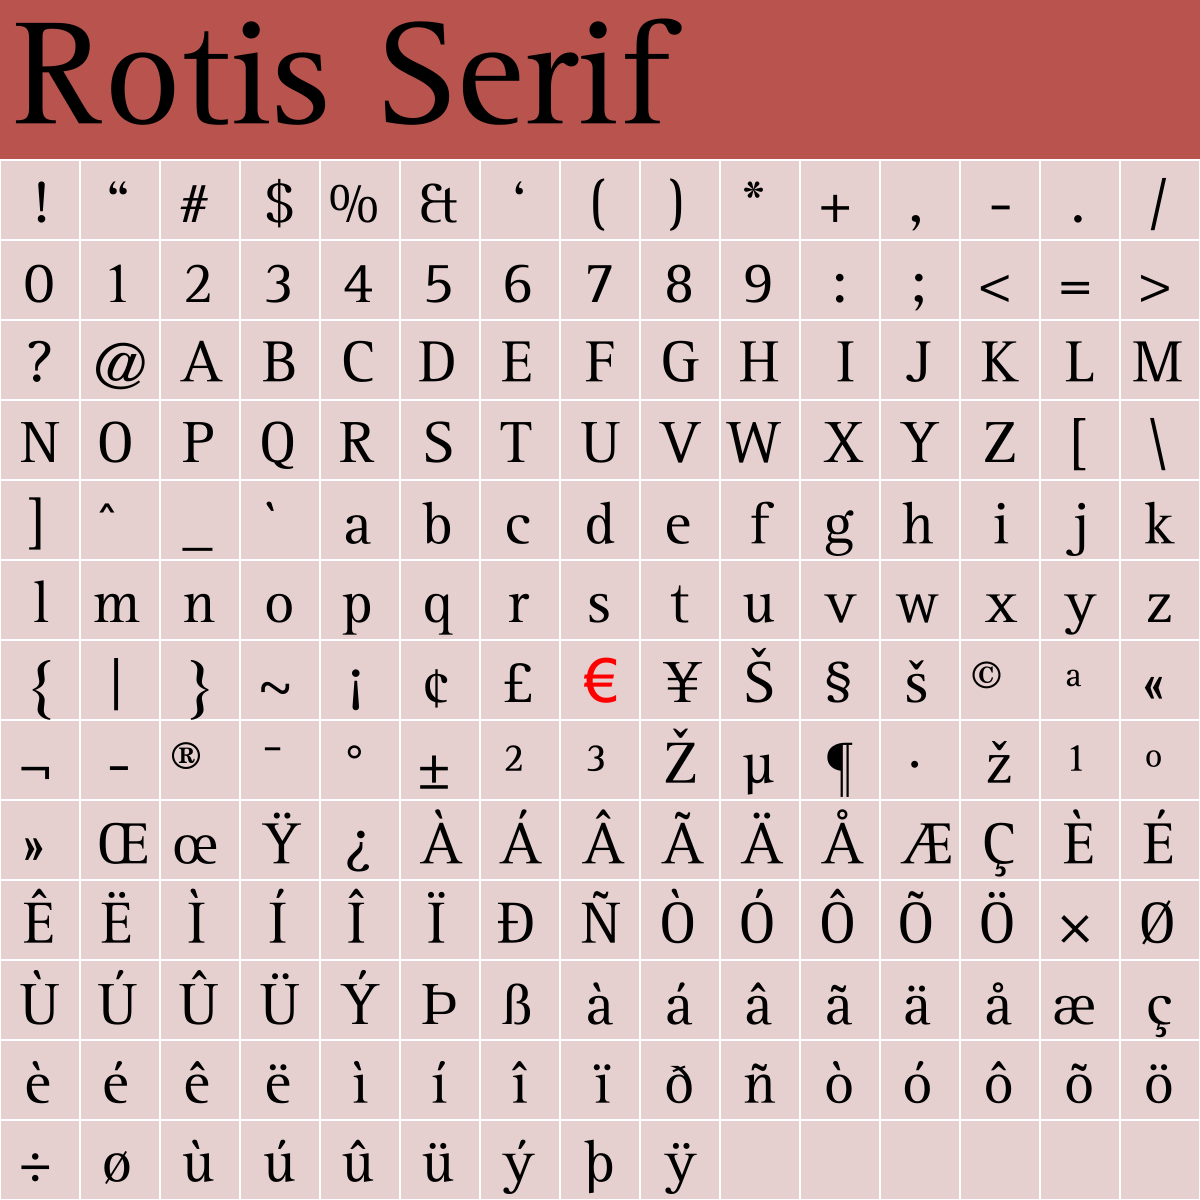 File Rotis Serif Exemple Complet Svg Wikimedia Commons